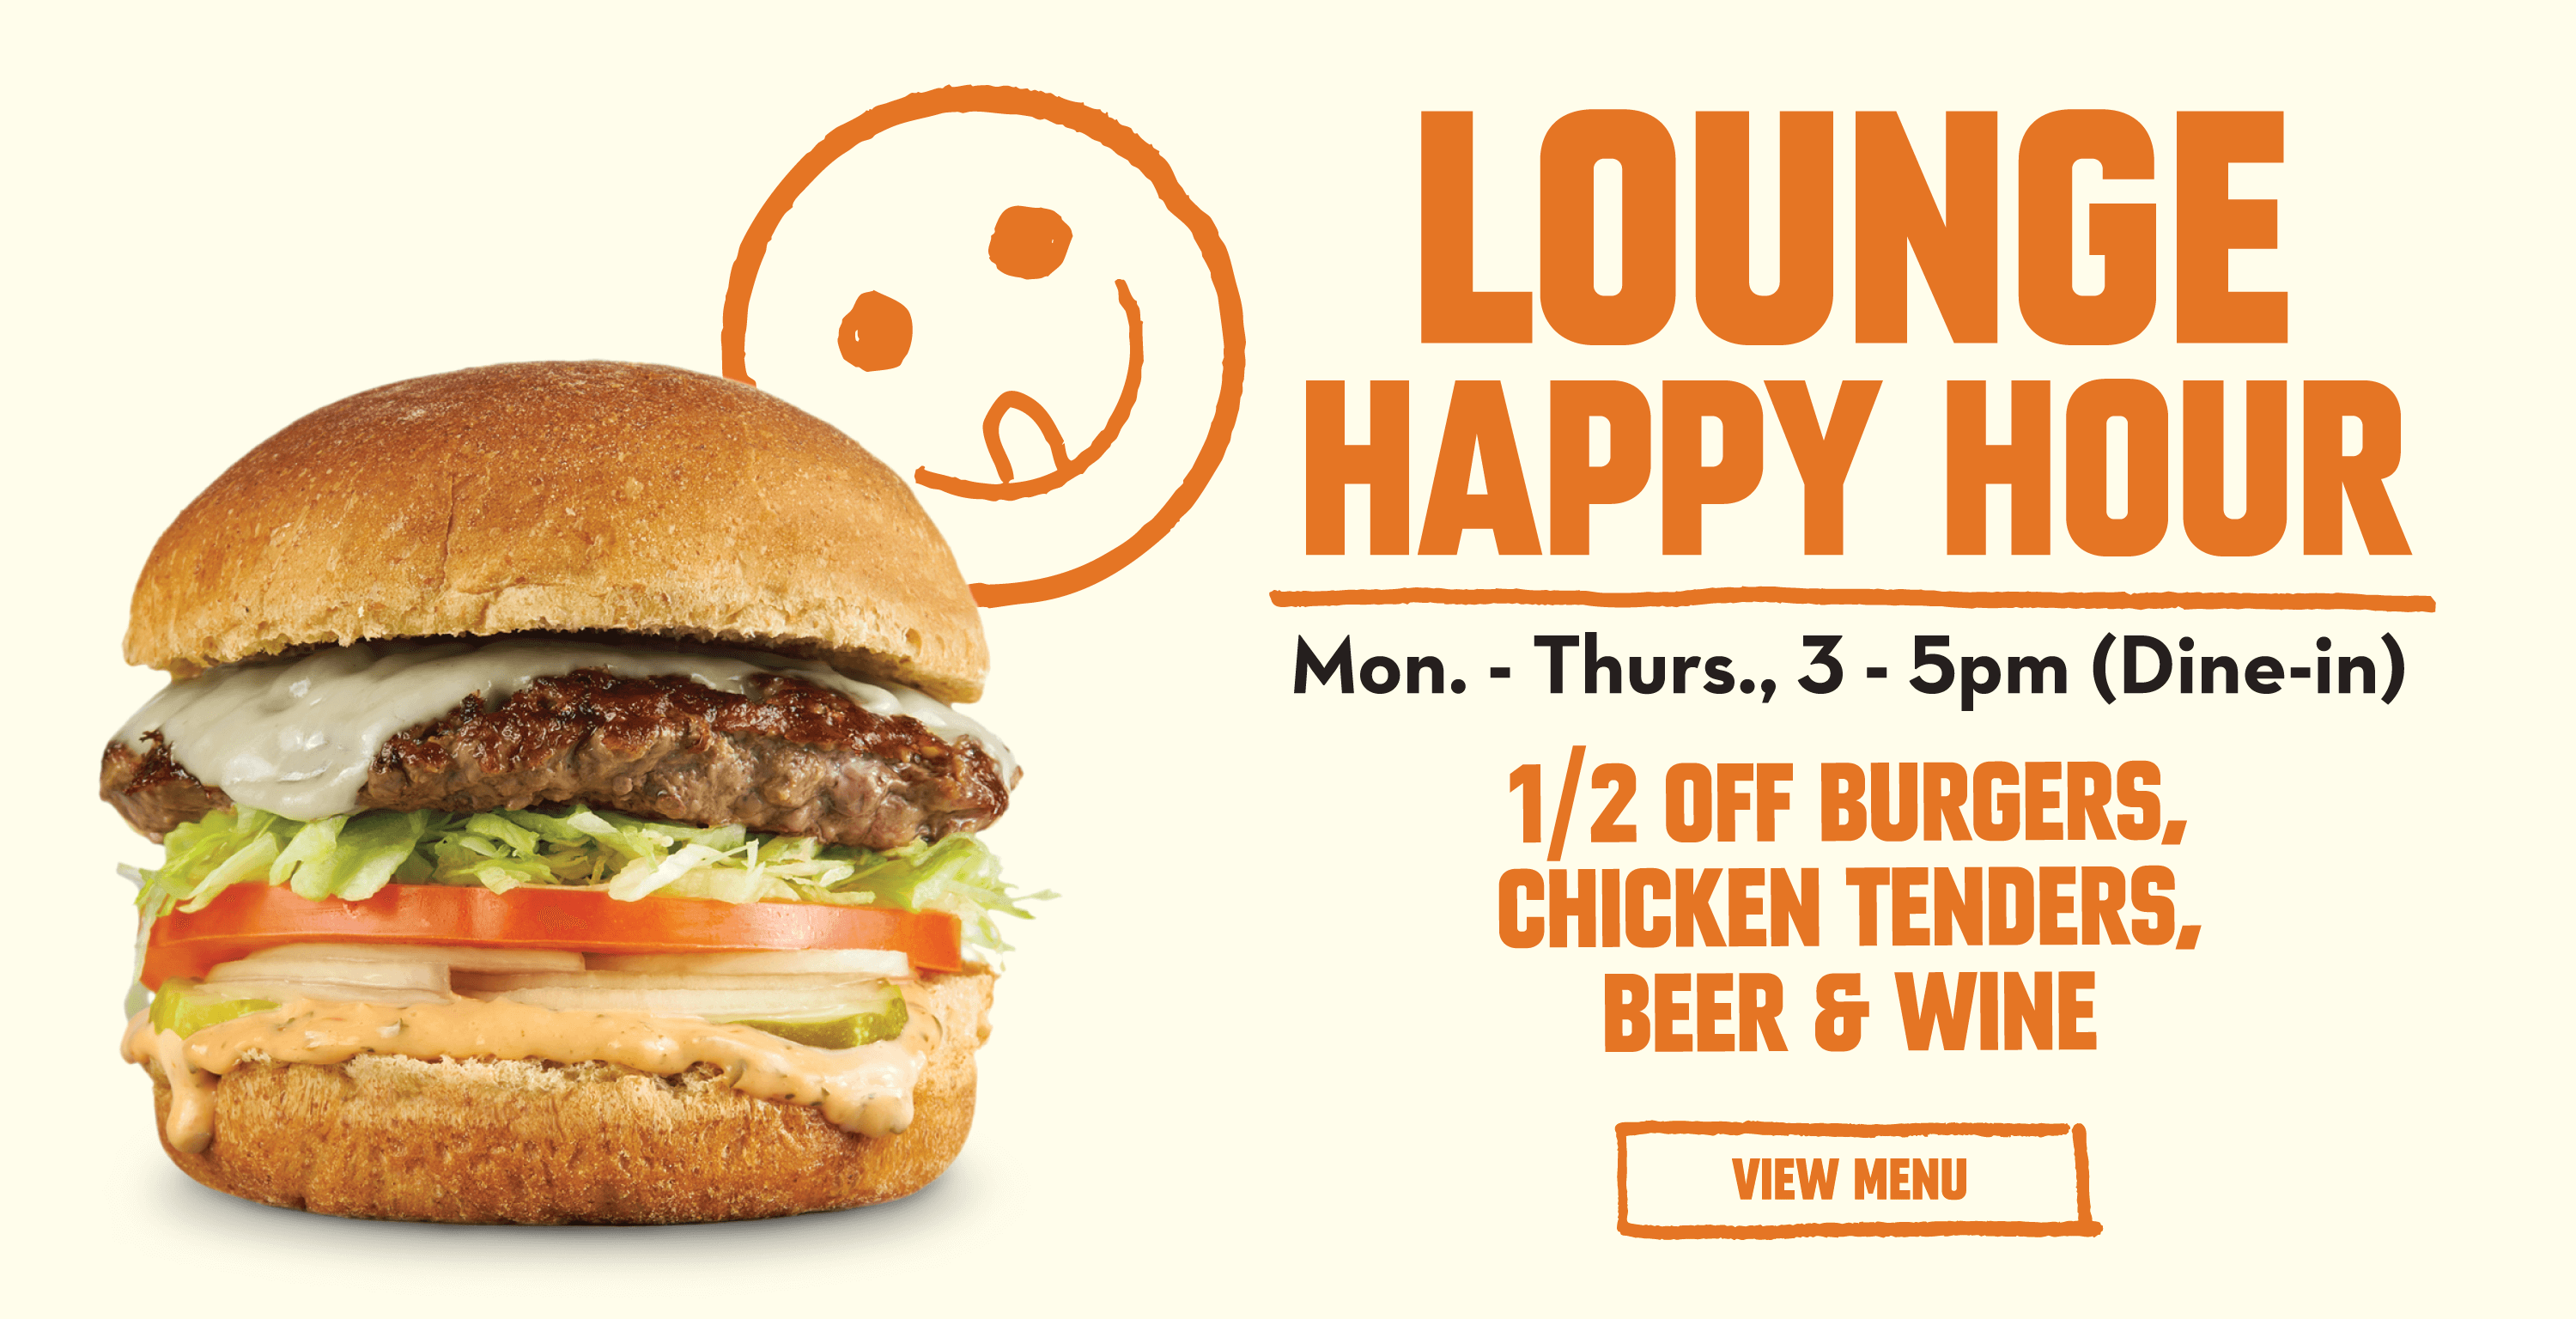 Lounge Happy Hour - Every Monday through Thursday from 3pm - 5pm - Click here to Order - Desktop Version